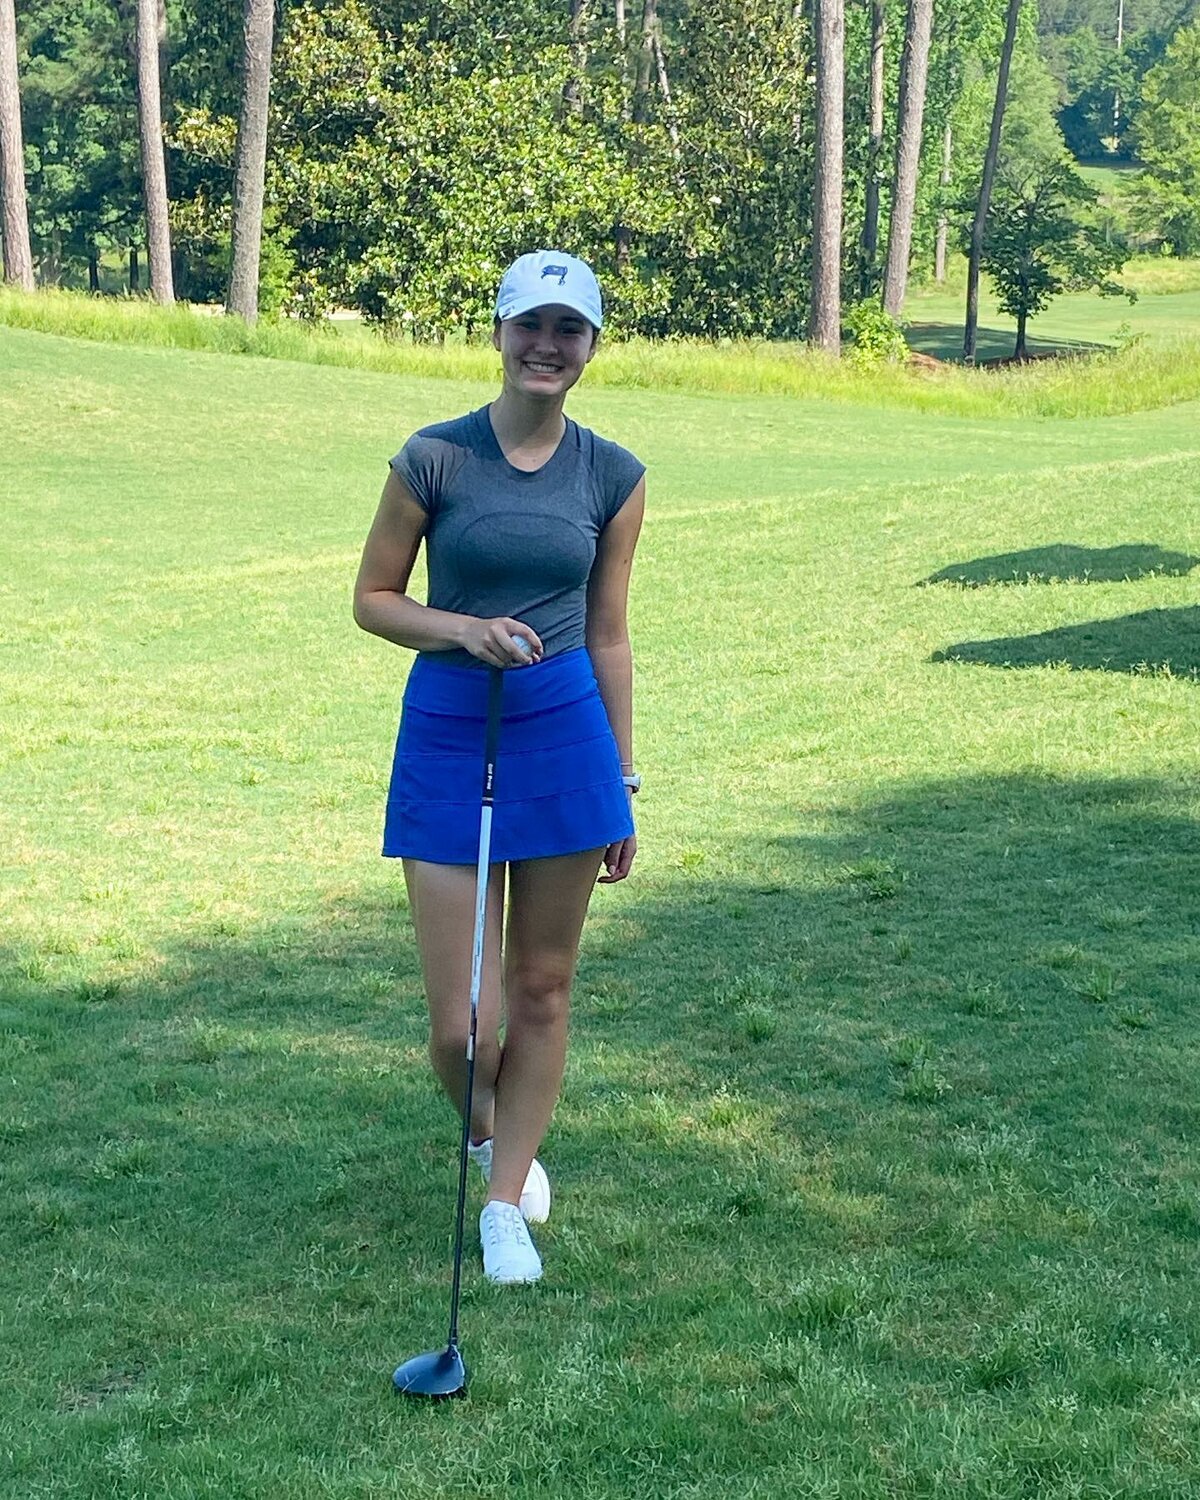 Fairhope junior Addison Spears was at her third consecutive Alabama High School Athletic Association Class 7A state tournament earlier this week at the RTJ Grand National Golf Course in Opelika and recorded the lowest score of the Baldwin County qualifiers at 148.